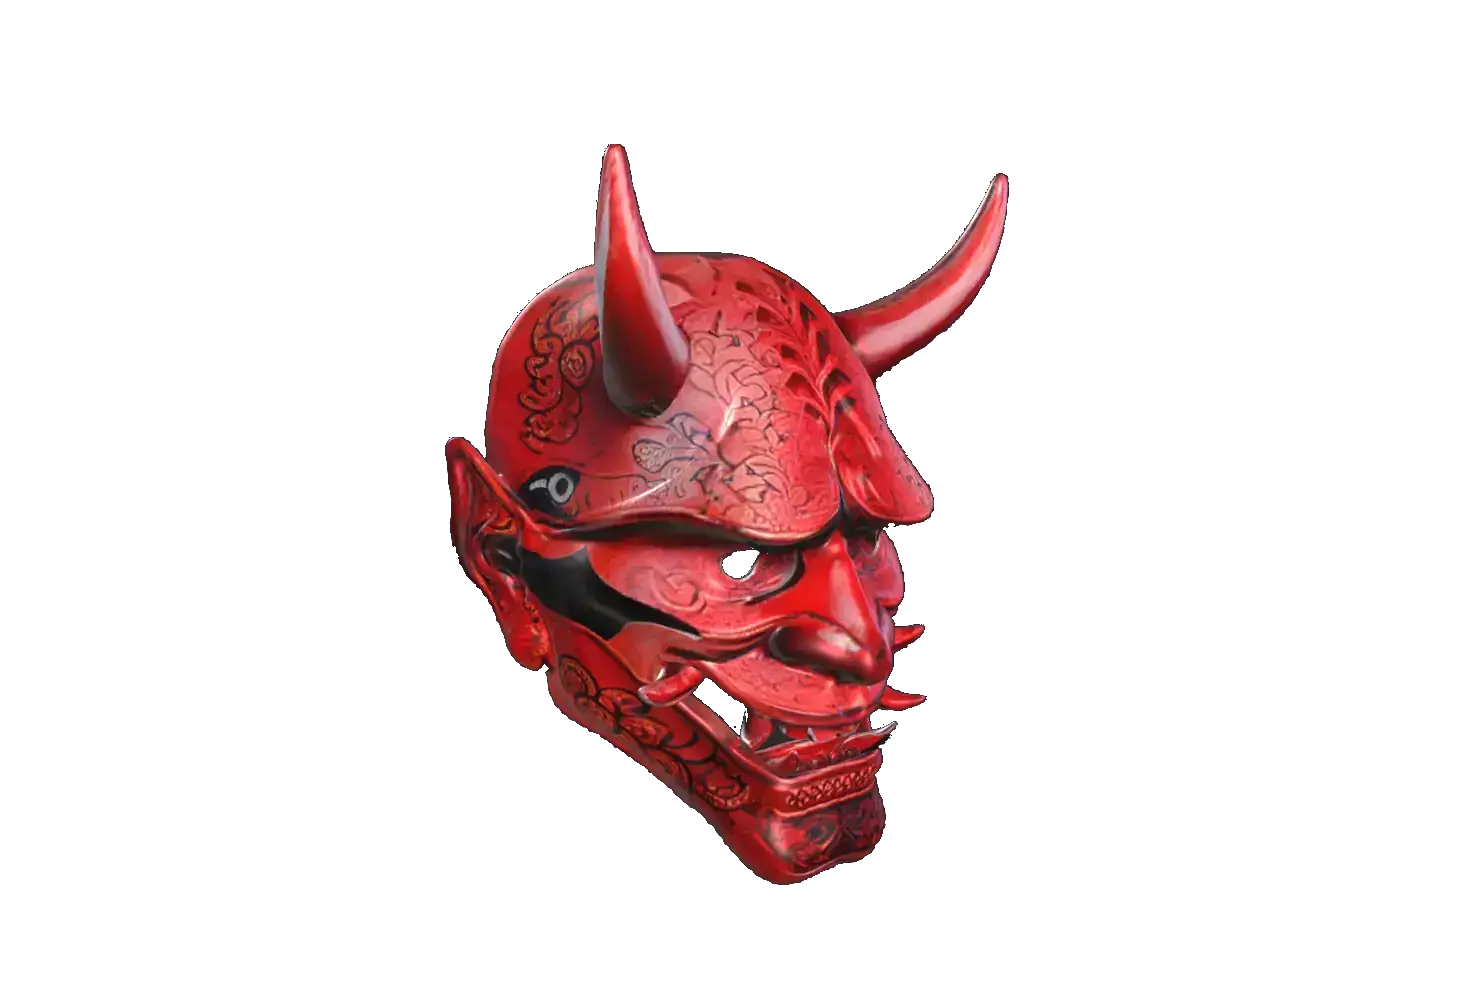 A monster mask, Red fangs, Samurai outfit that fused with japanese batik style